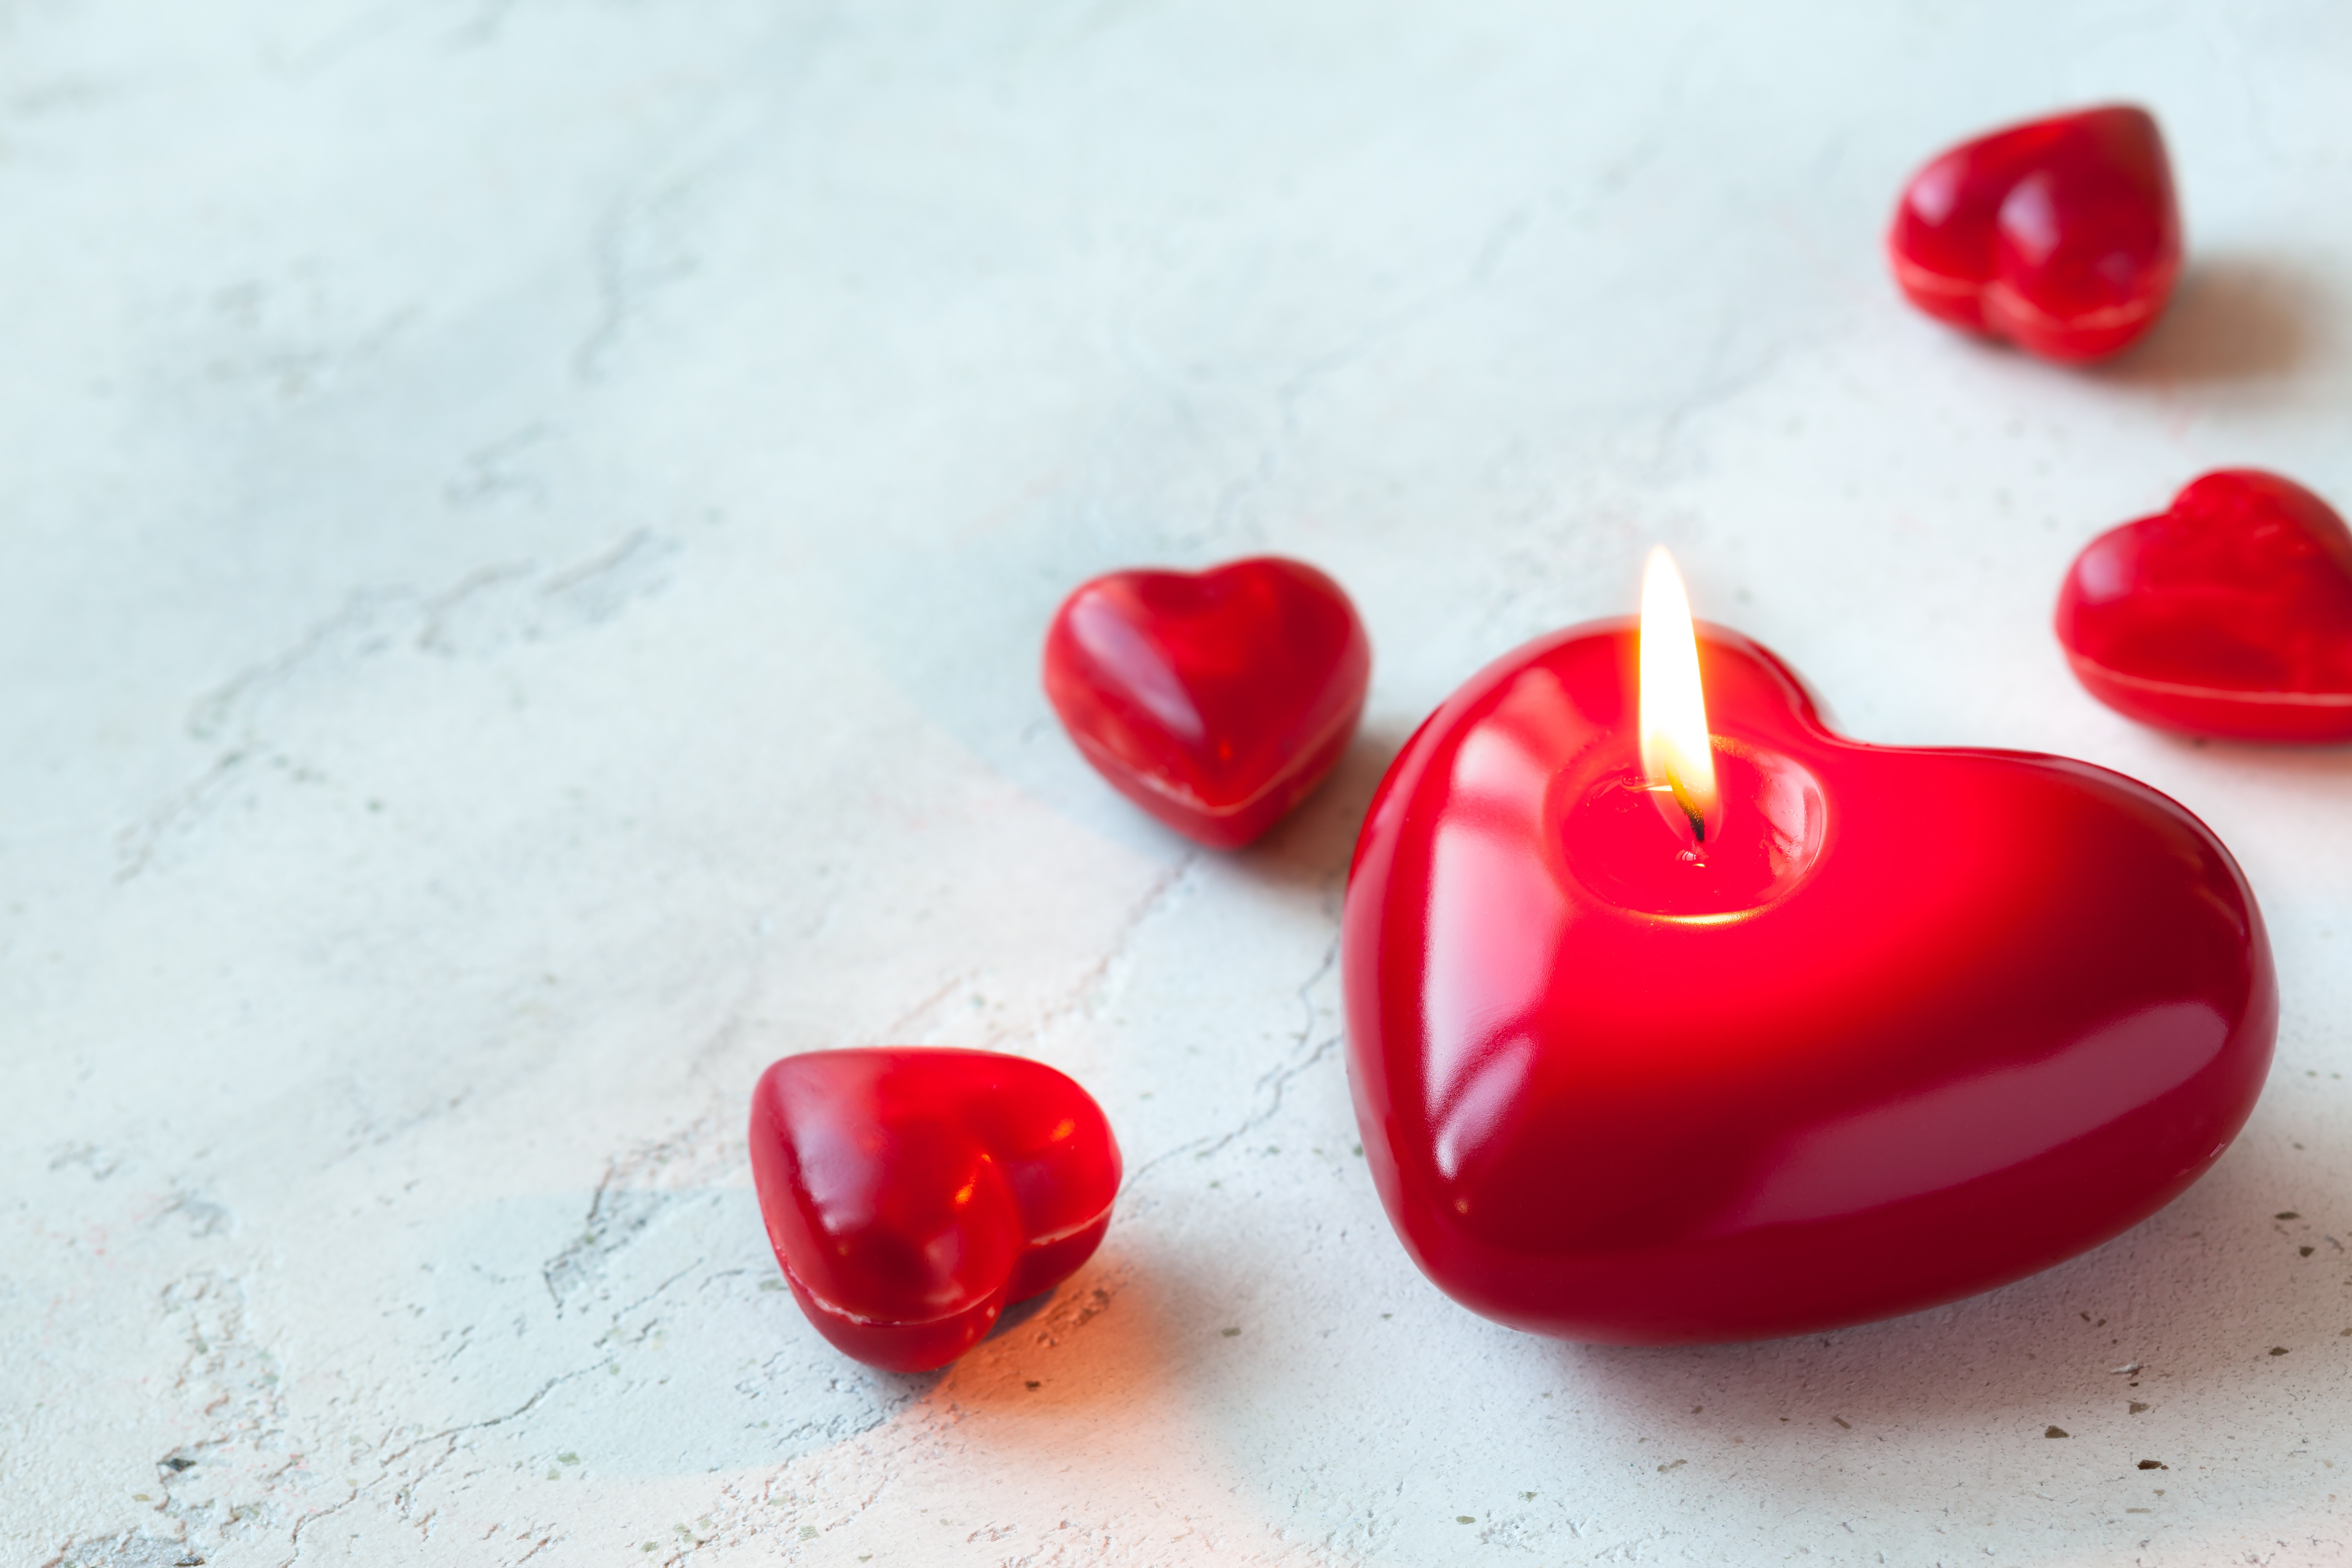 Candle Heart Romantic 5616x3744